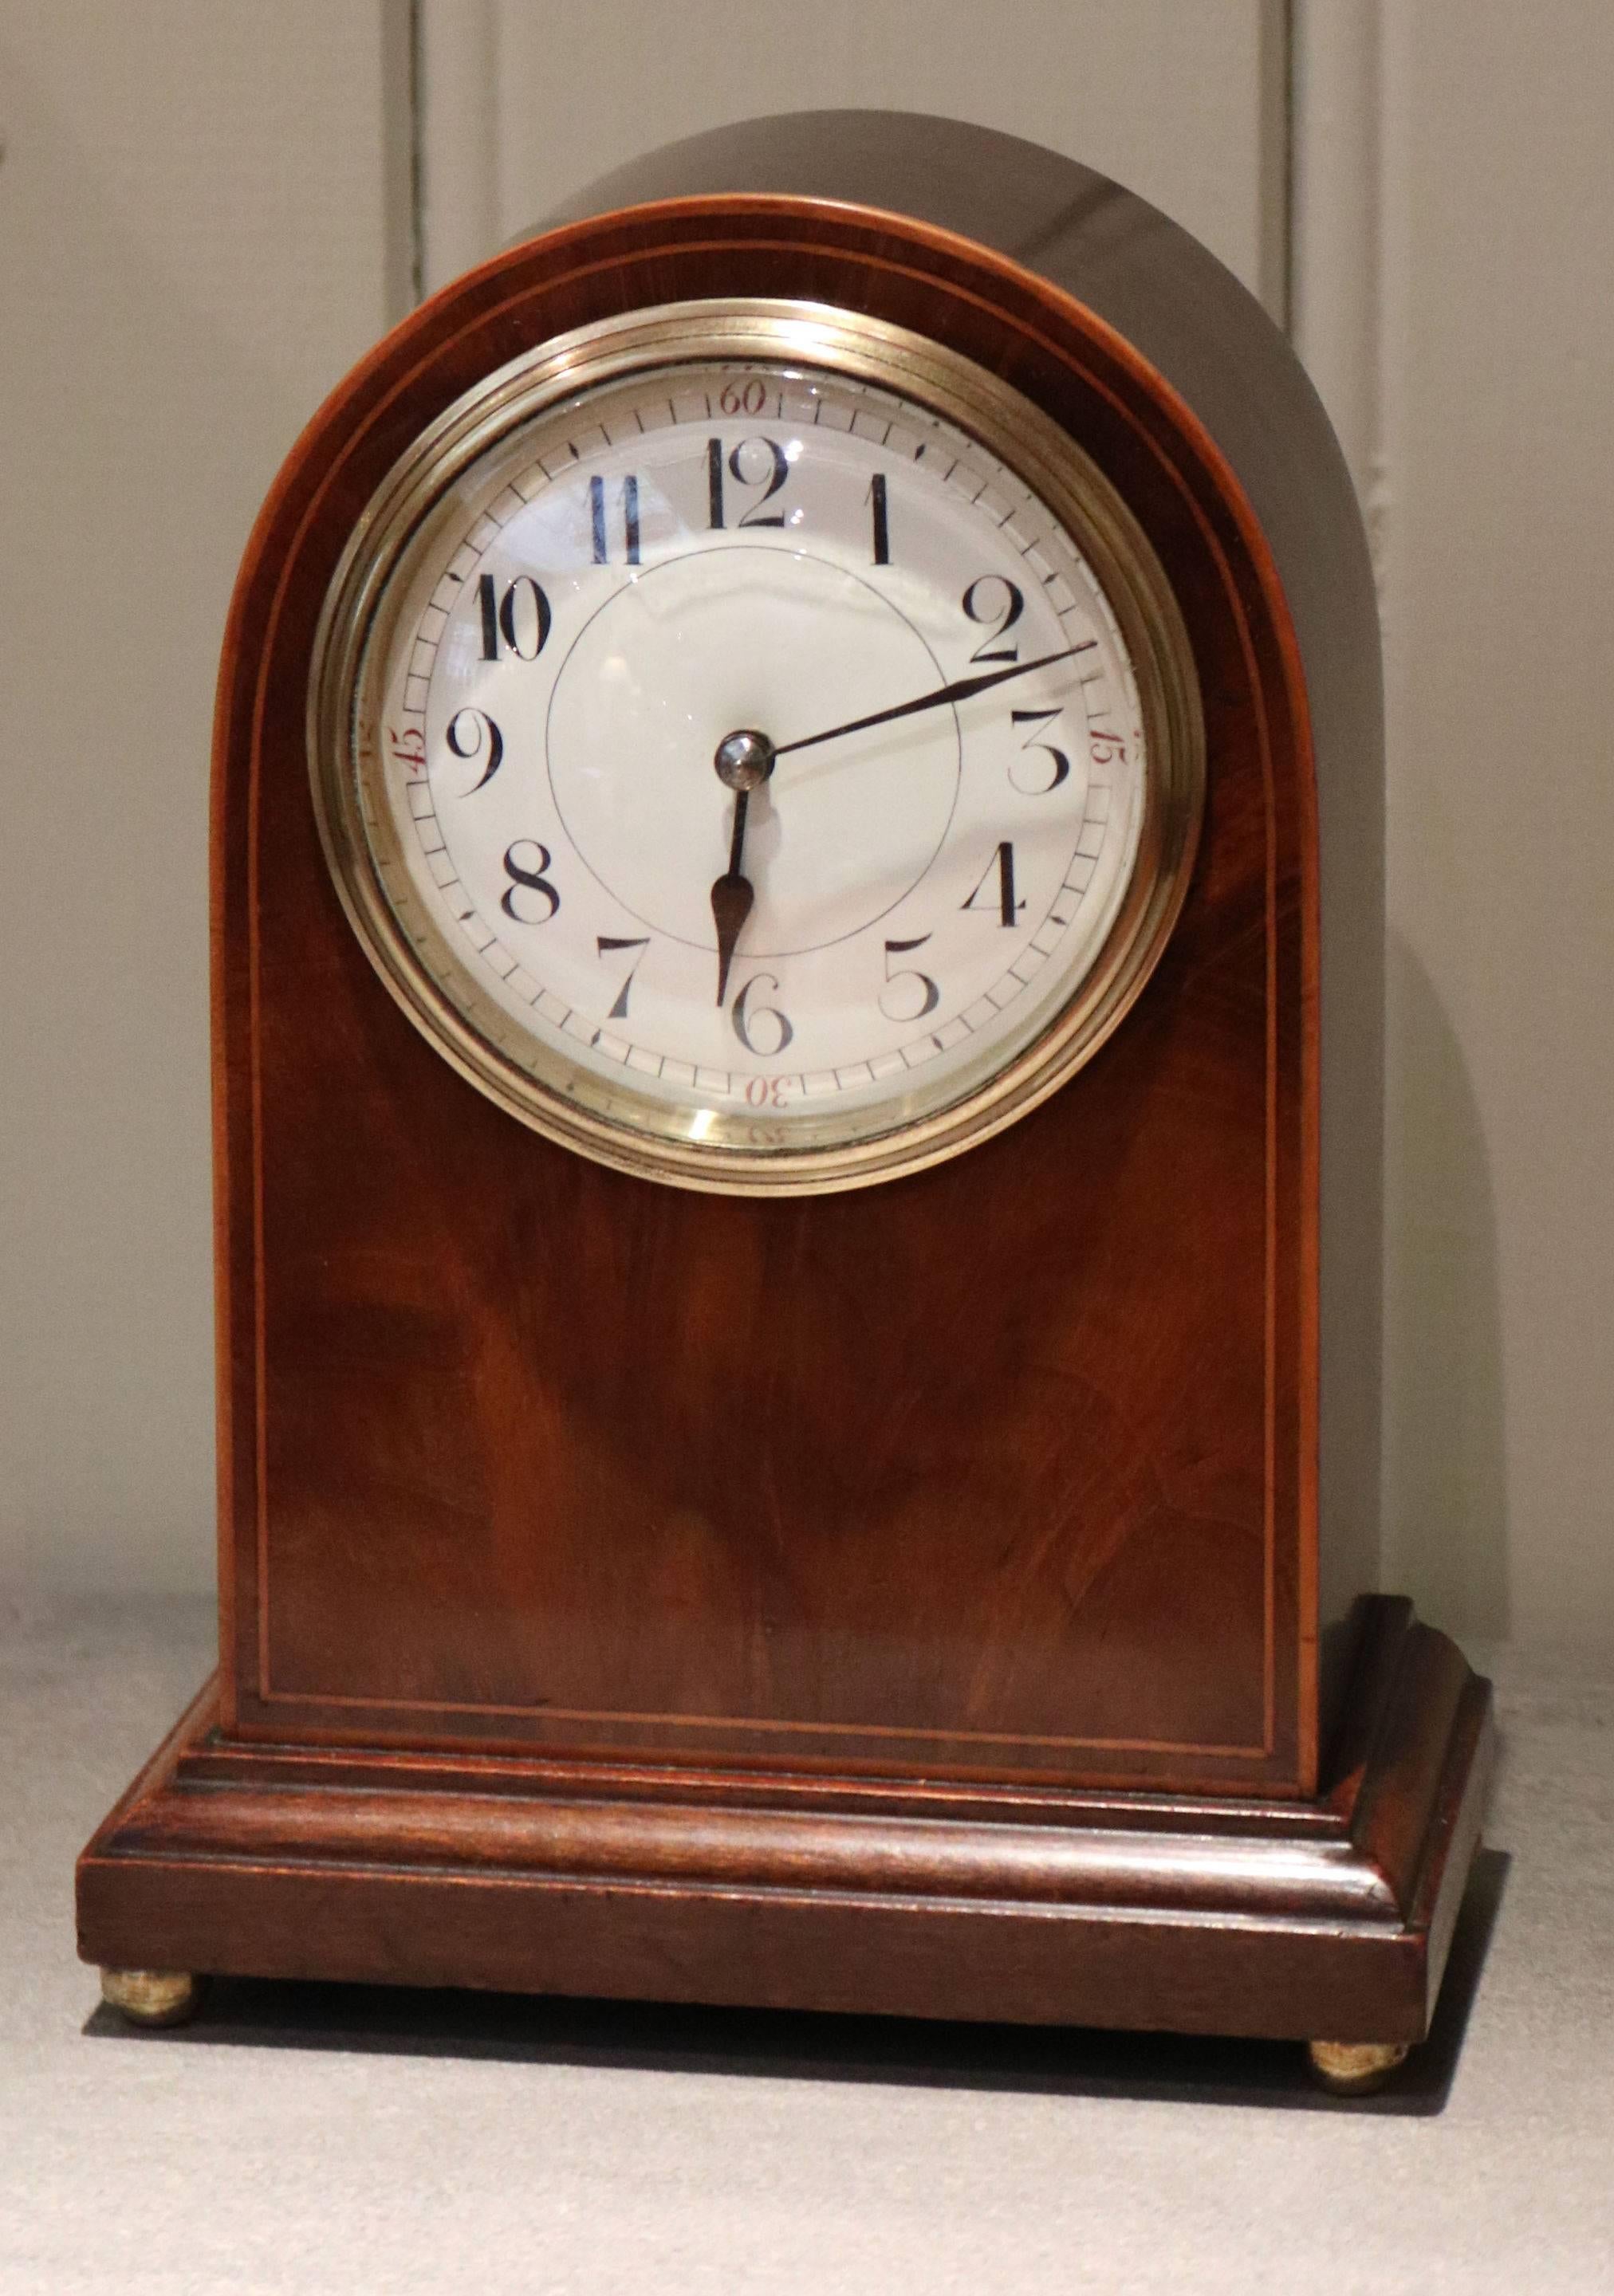 A solid mahogany timepiece mantel clock dating to the early 20th century. It has an arched case, with boxwood stringing and a figured front panel. The enamel dial has a convex glass. It has a French made 8 day movement with a lever platform.